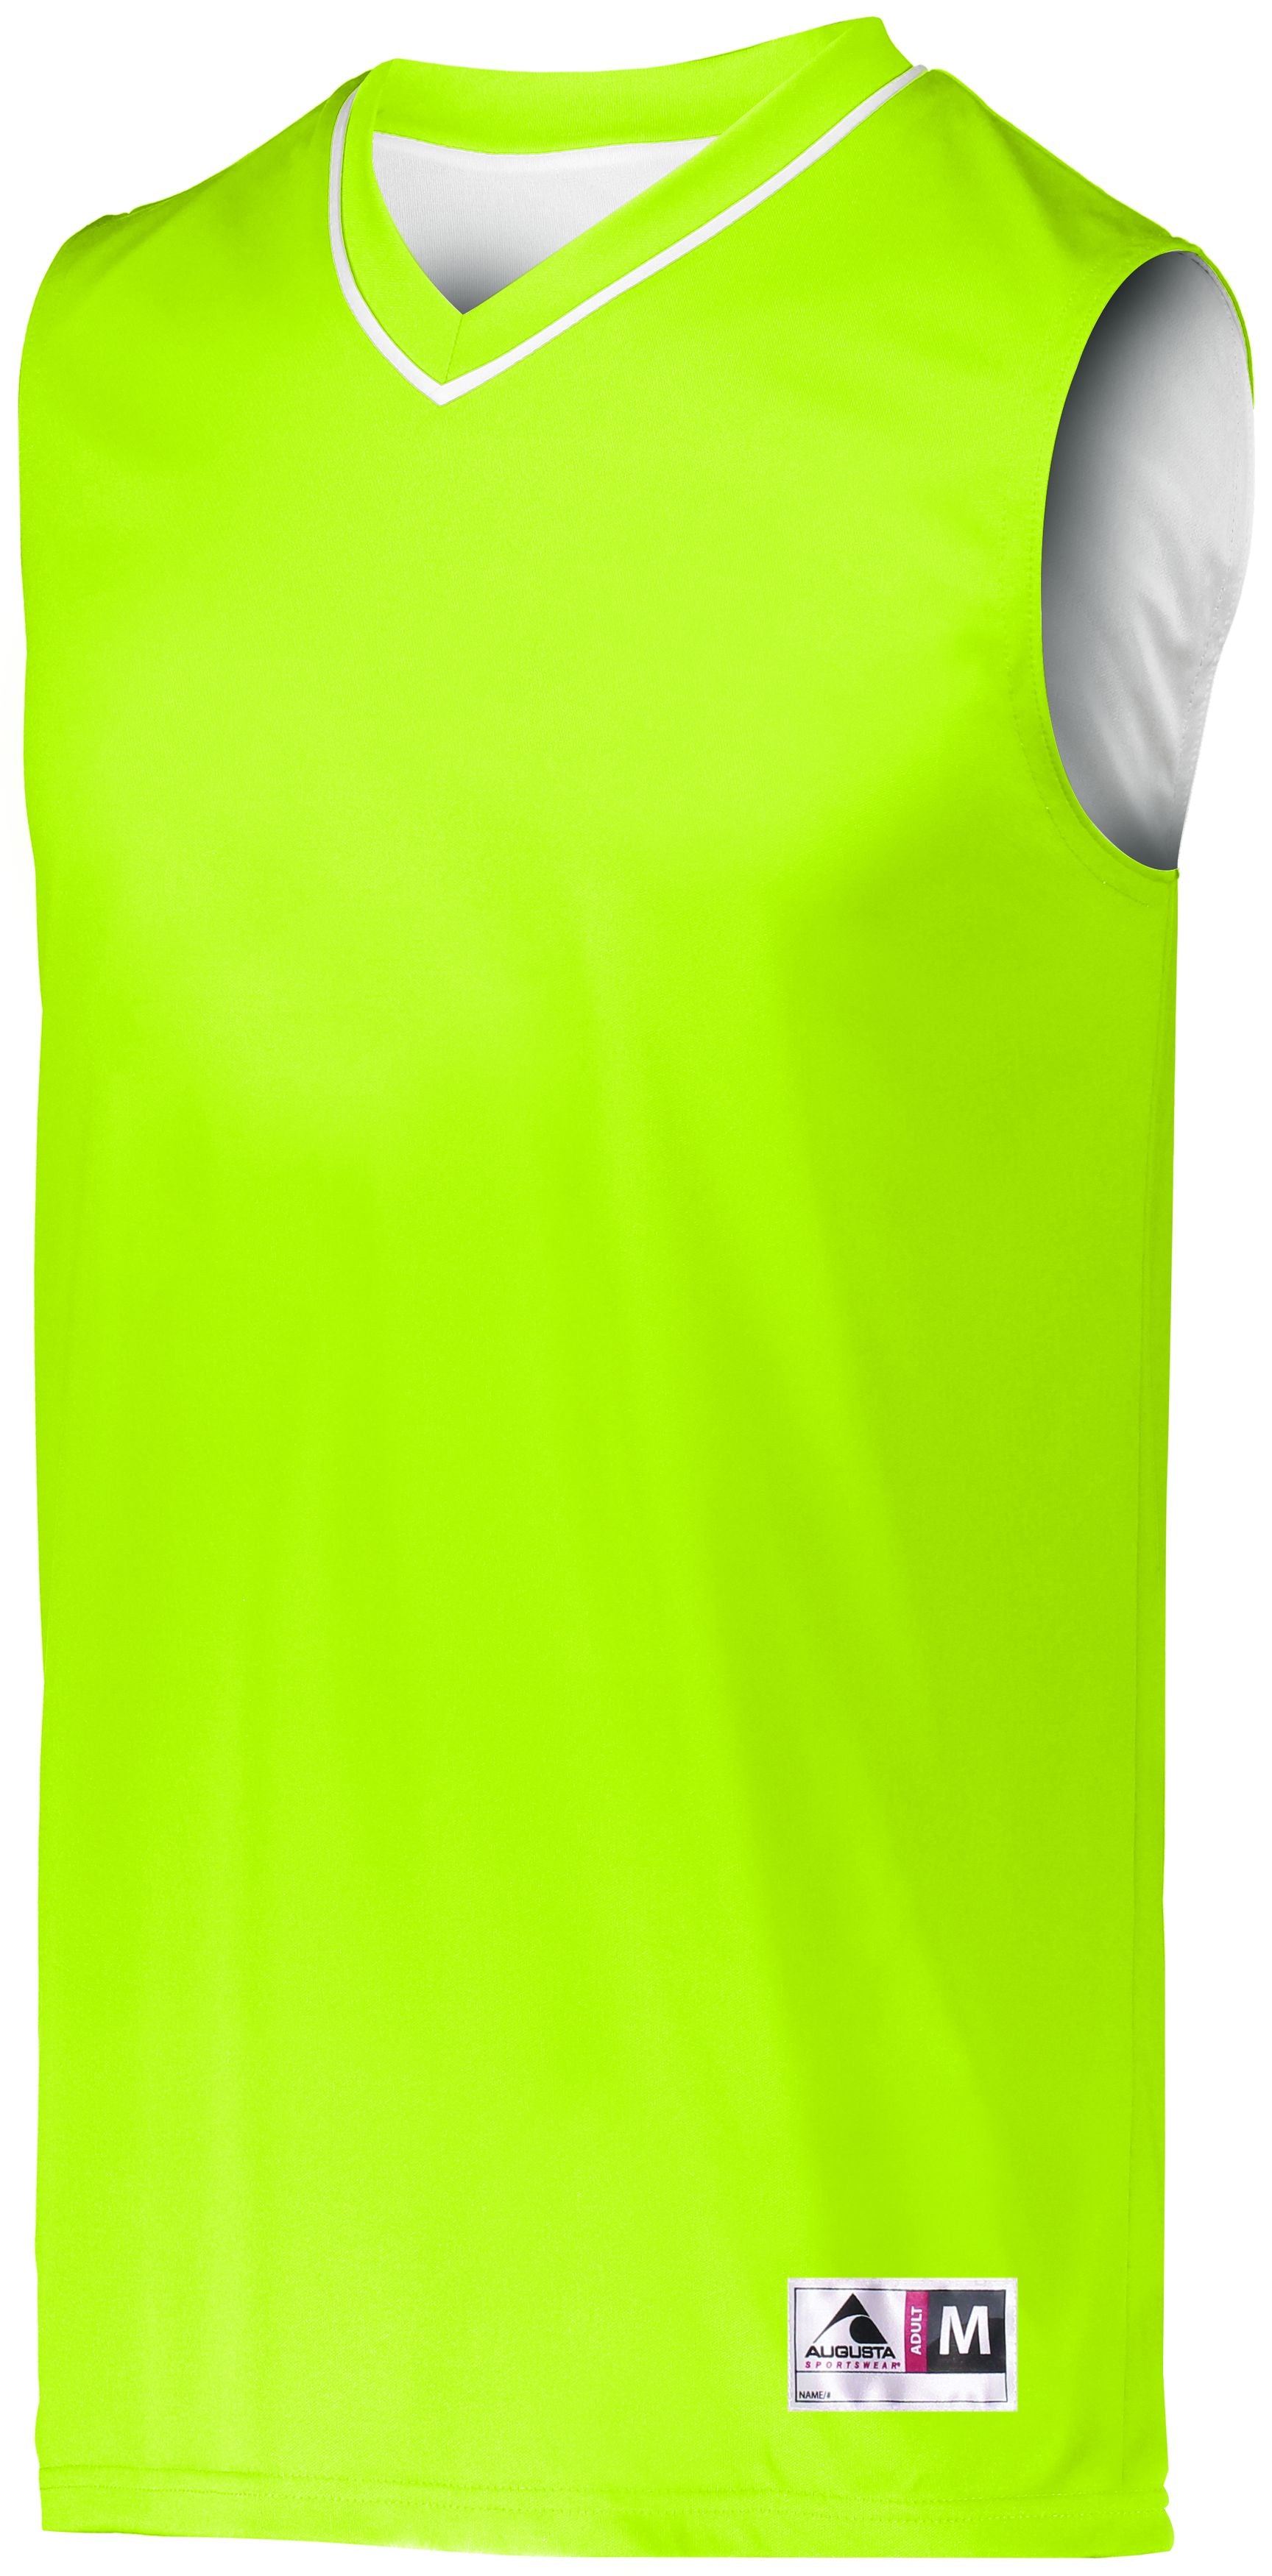 Augusta Sportswear Reversible Two-Color Jersey in Lime/White  -Part of the Adult, Adult-Jersey, Augusta-Products, Basketball, Shirts, All-Sports, All-Sports-1 product lines at KanaleyCreations.com